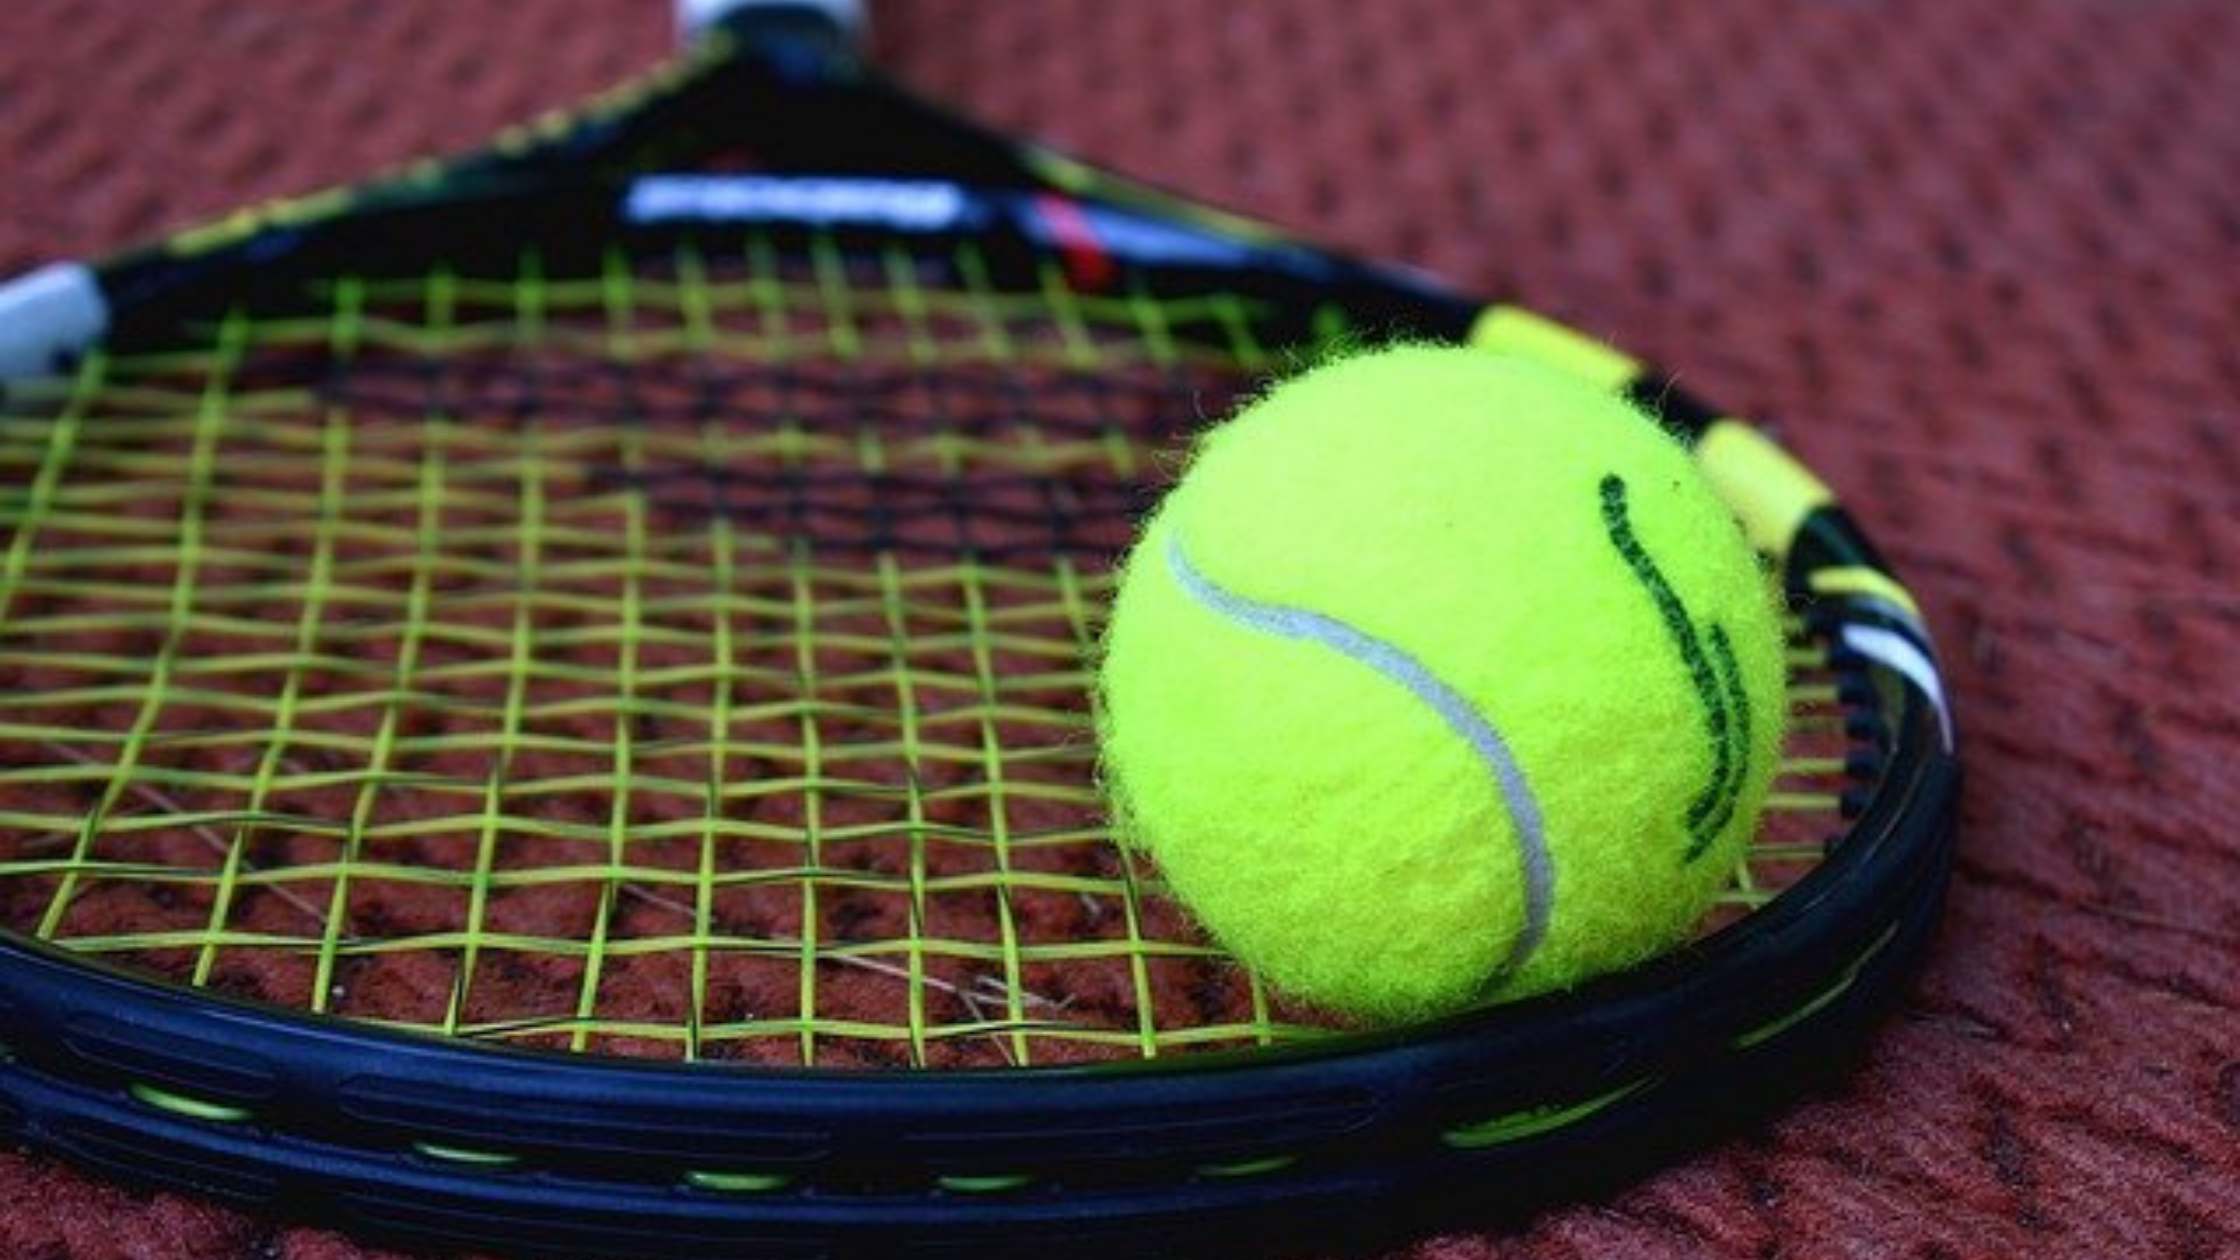 It is important to have tennis strings that complement your game play, if you like to spin the ball then this is a post for you.